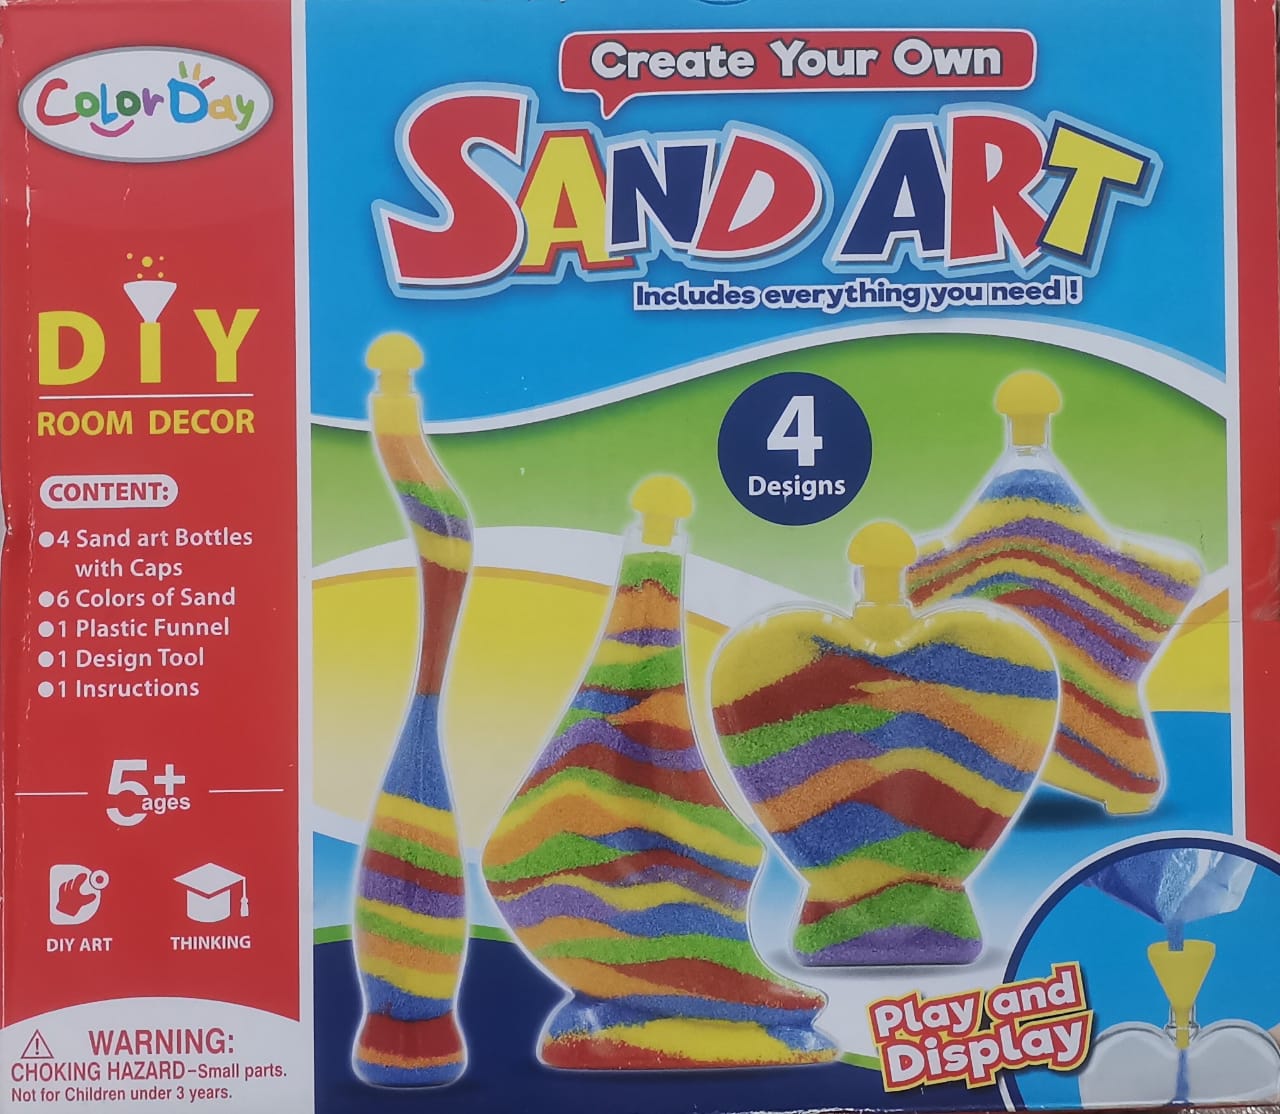 Create Your Own Sand Art - Color Day